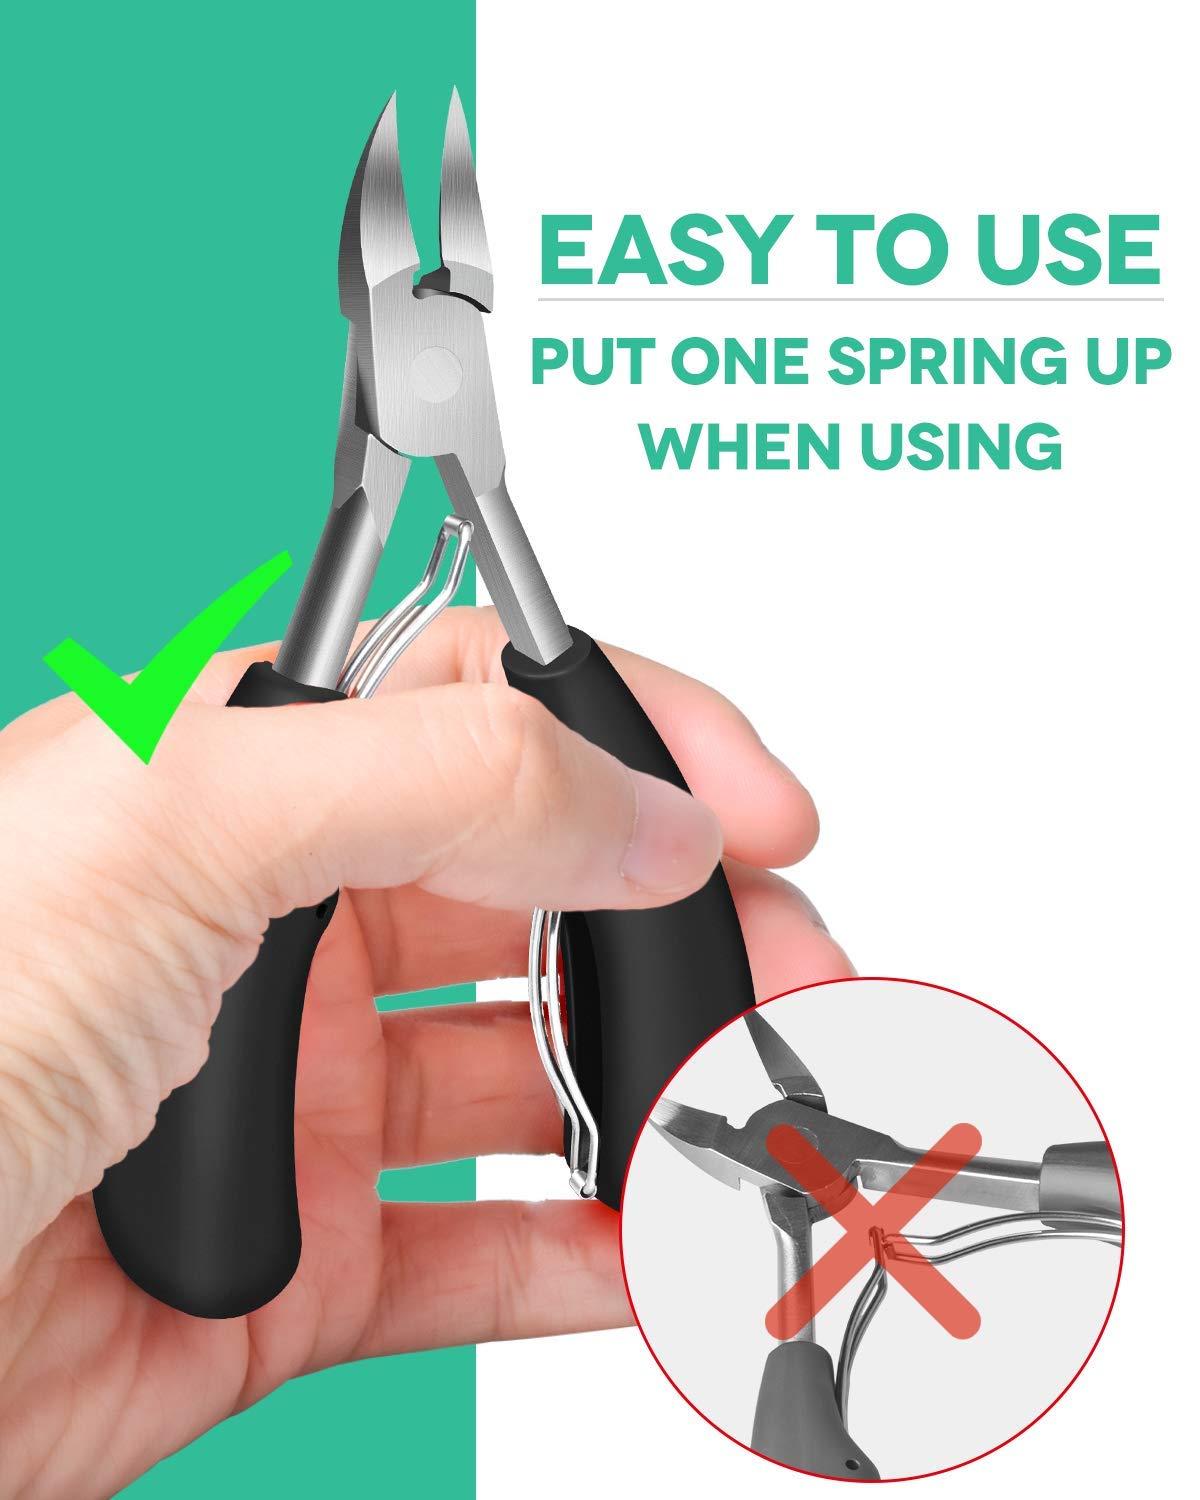 Thick Toenail Clippers, Nail Clippers for Thick & Ingrown Toenails Heavy  Duty Professional Podiatrist Toenail Clippers 